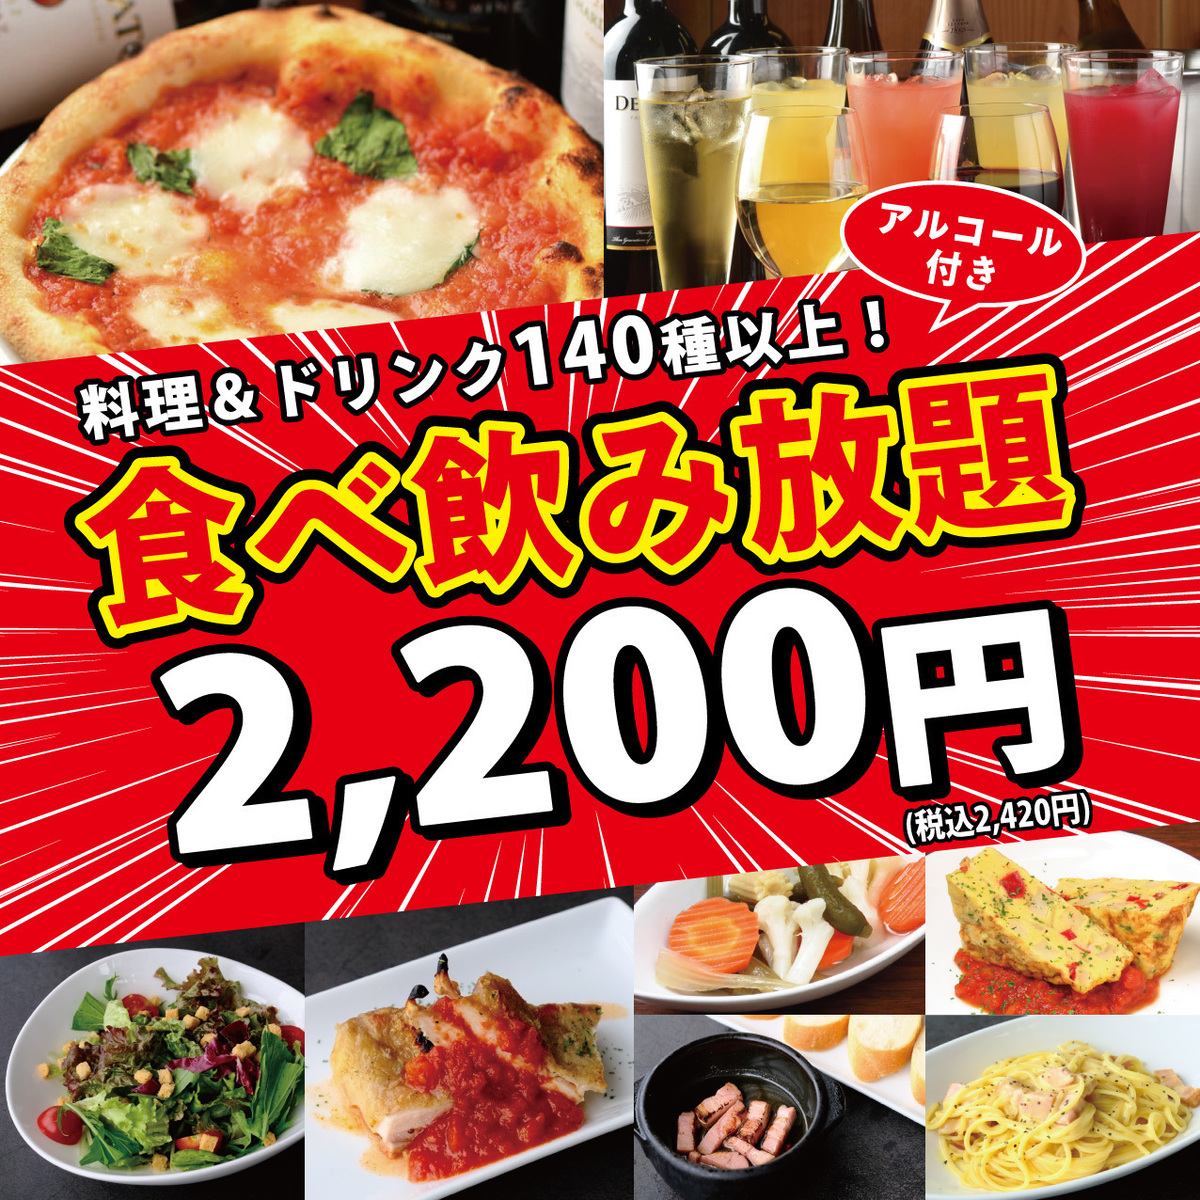 ≪All-you-can-eat specialty store≫ 30 seconds walk from Sakae Station Exit 1! All-you-can-eat and drink for 2,420 yen ♪